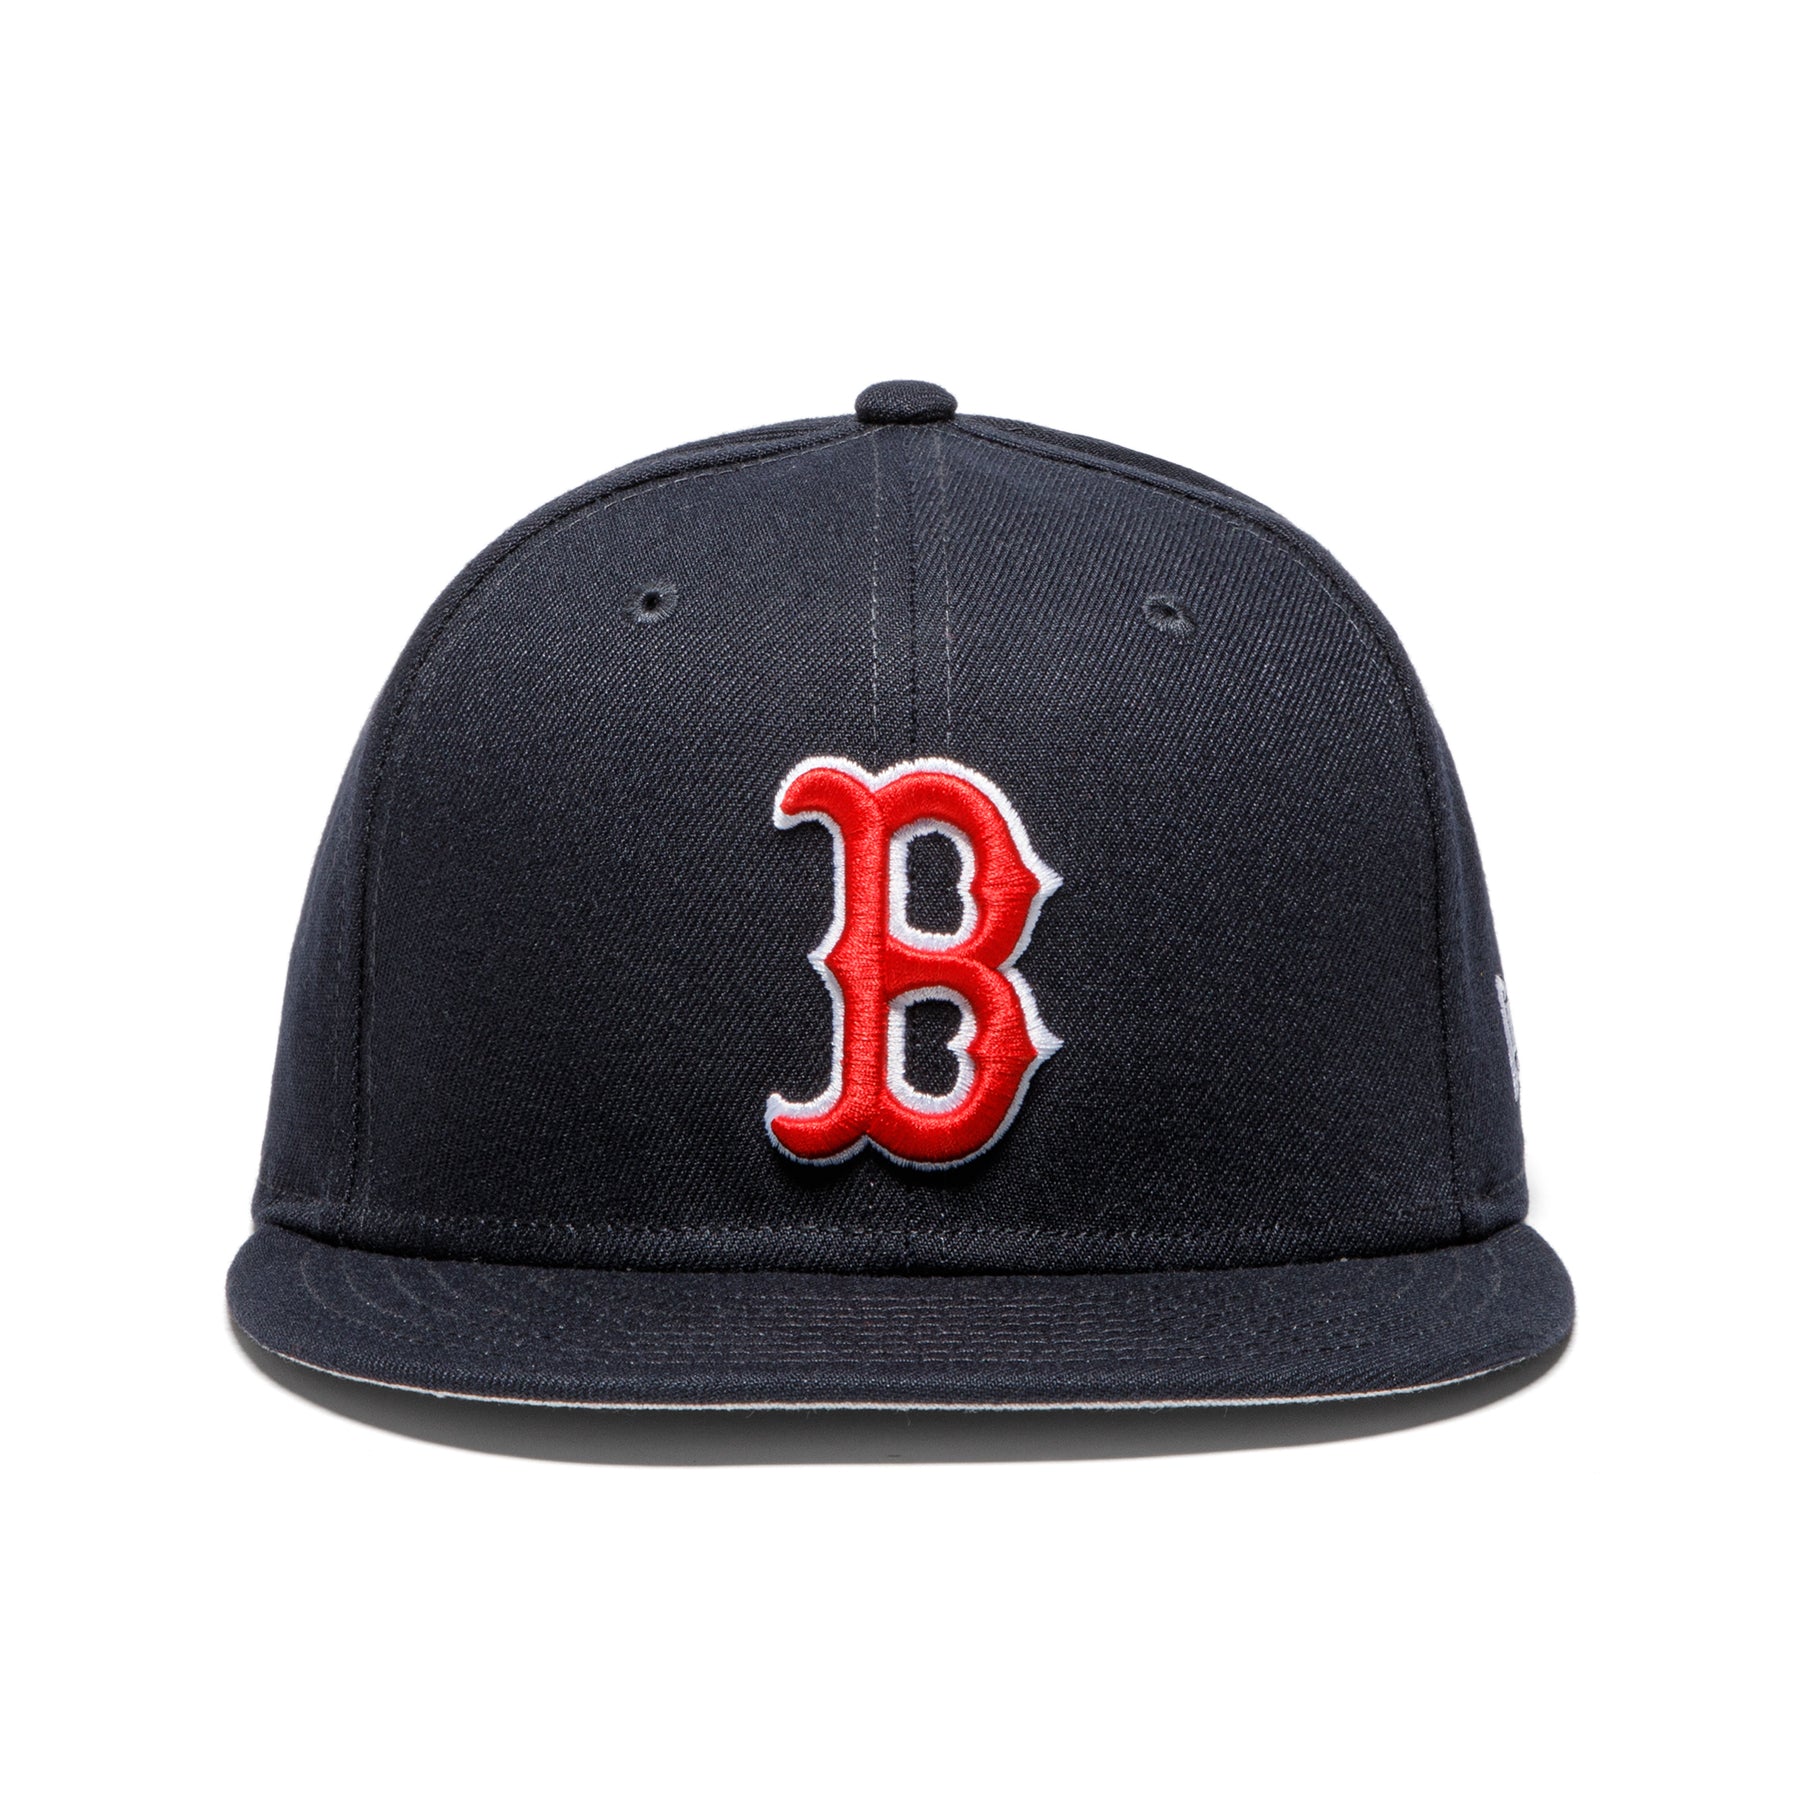 New Era Boston Red Sox Varsity Pin 59FIFTY Fitted Cap Men Caps blue|beige in Size:7 3/8